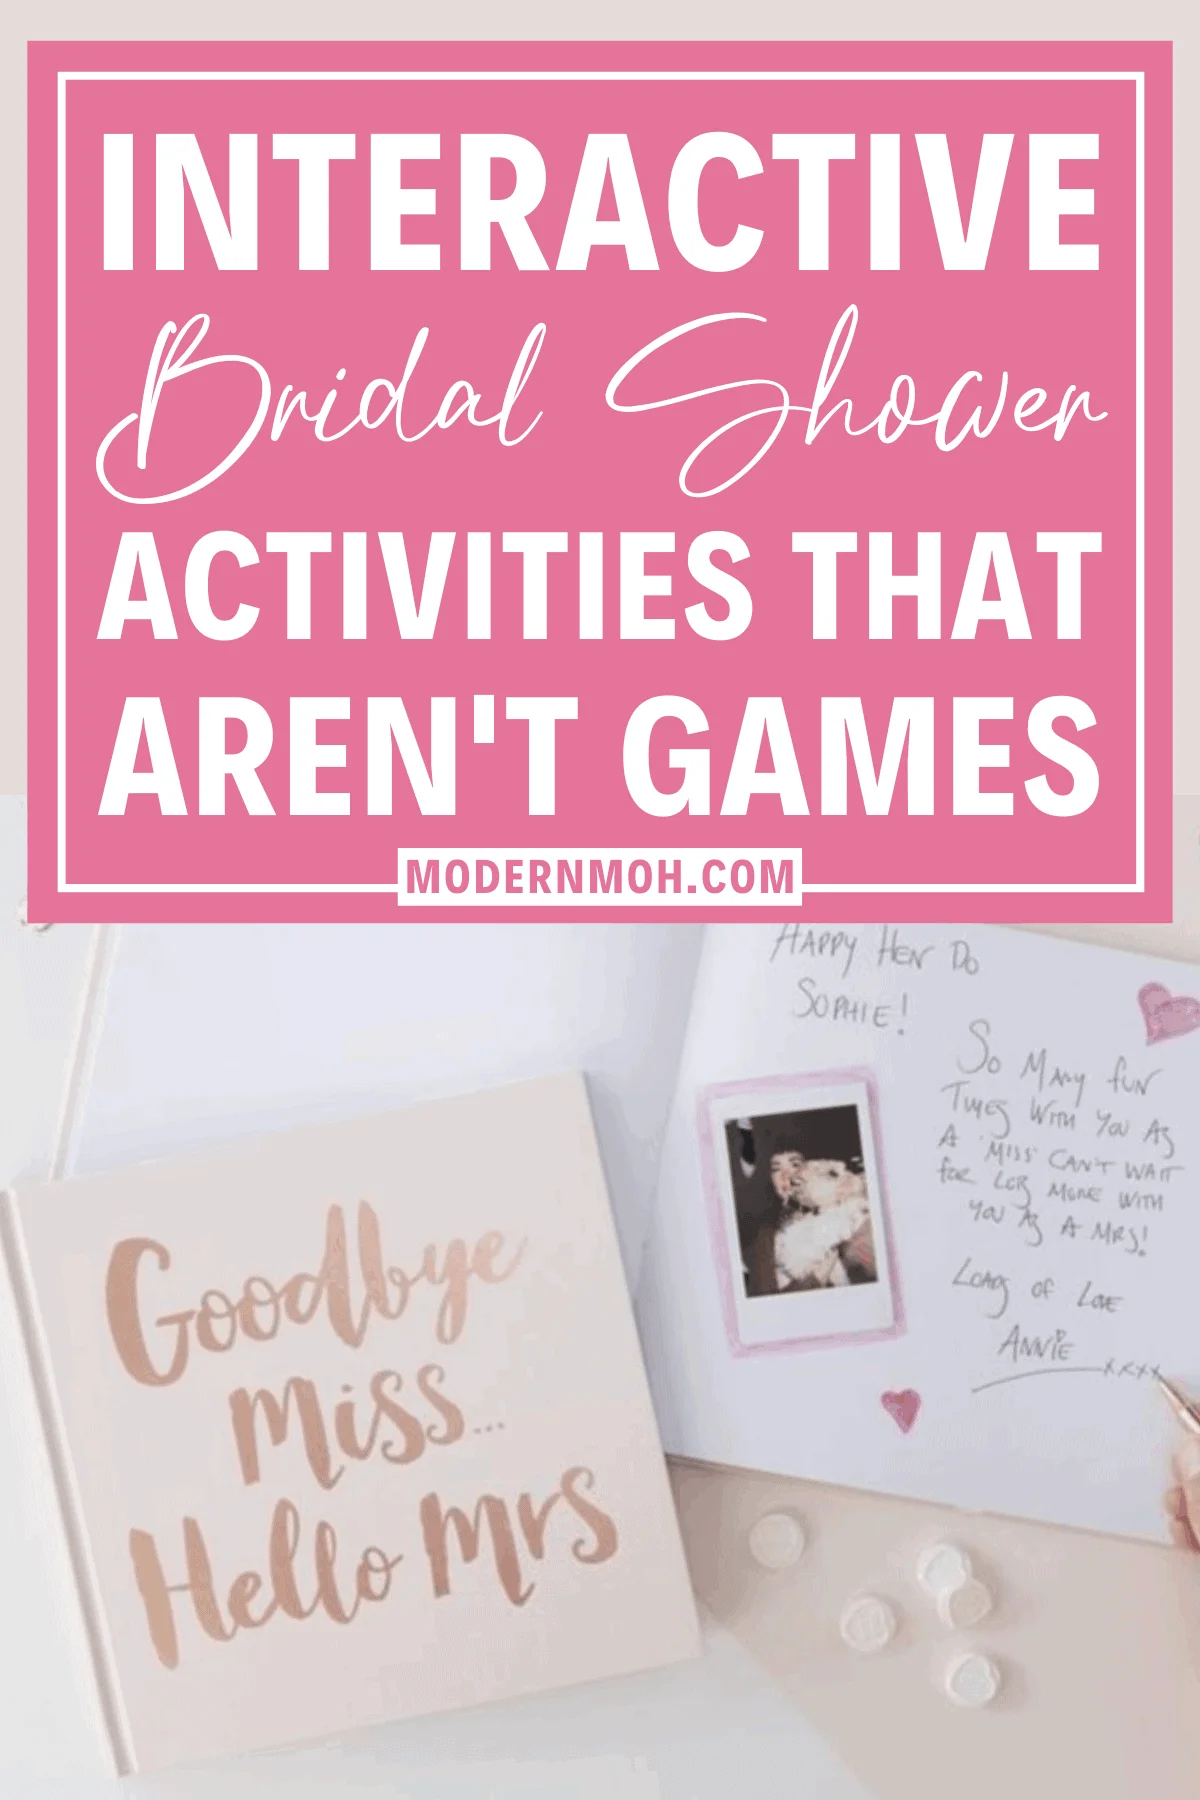 5 Fun Bridal Shower Activities That Are Not Games